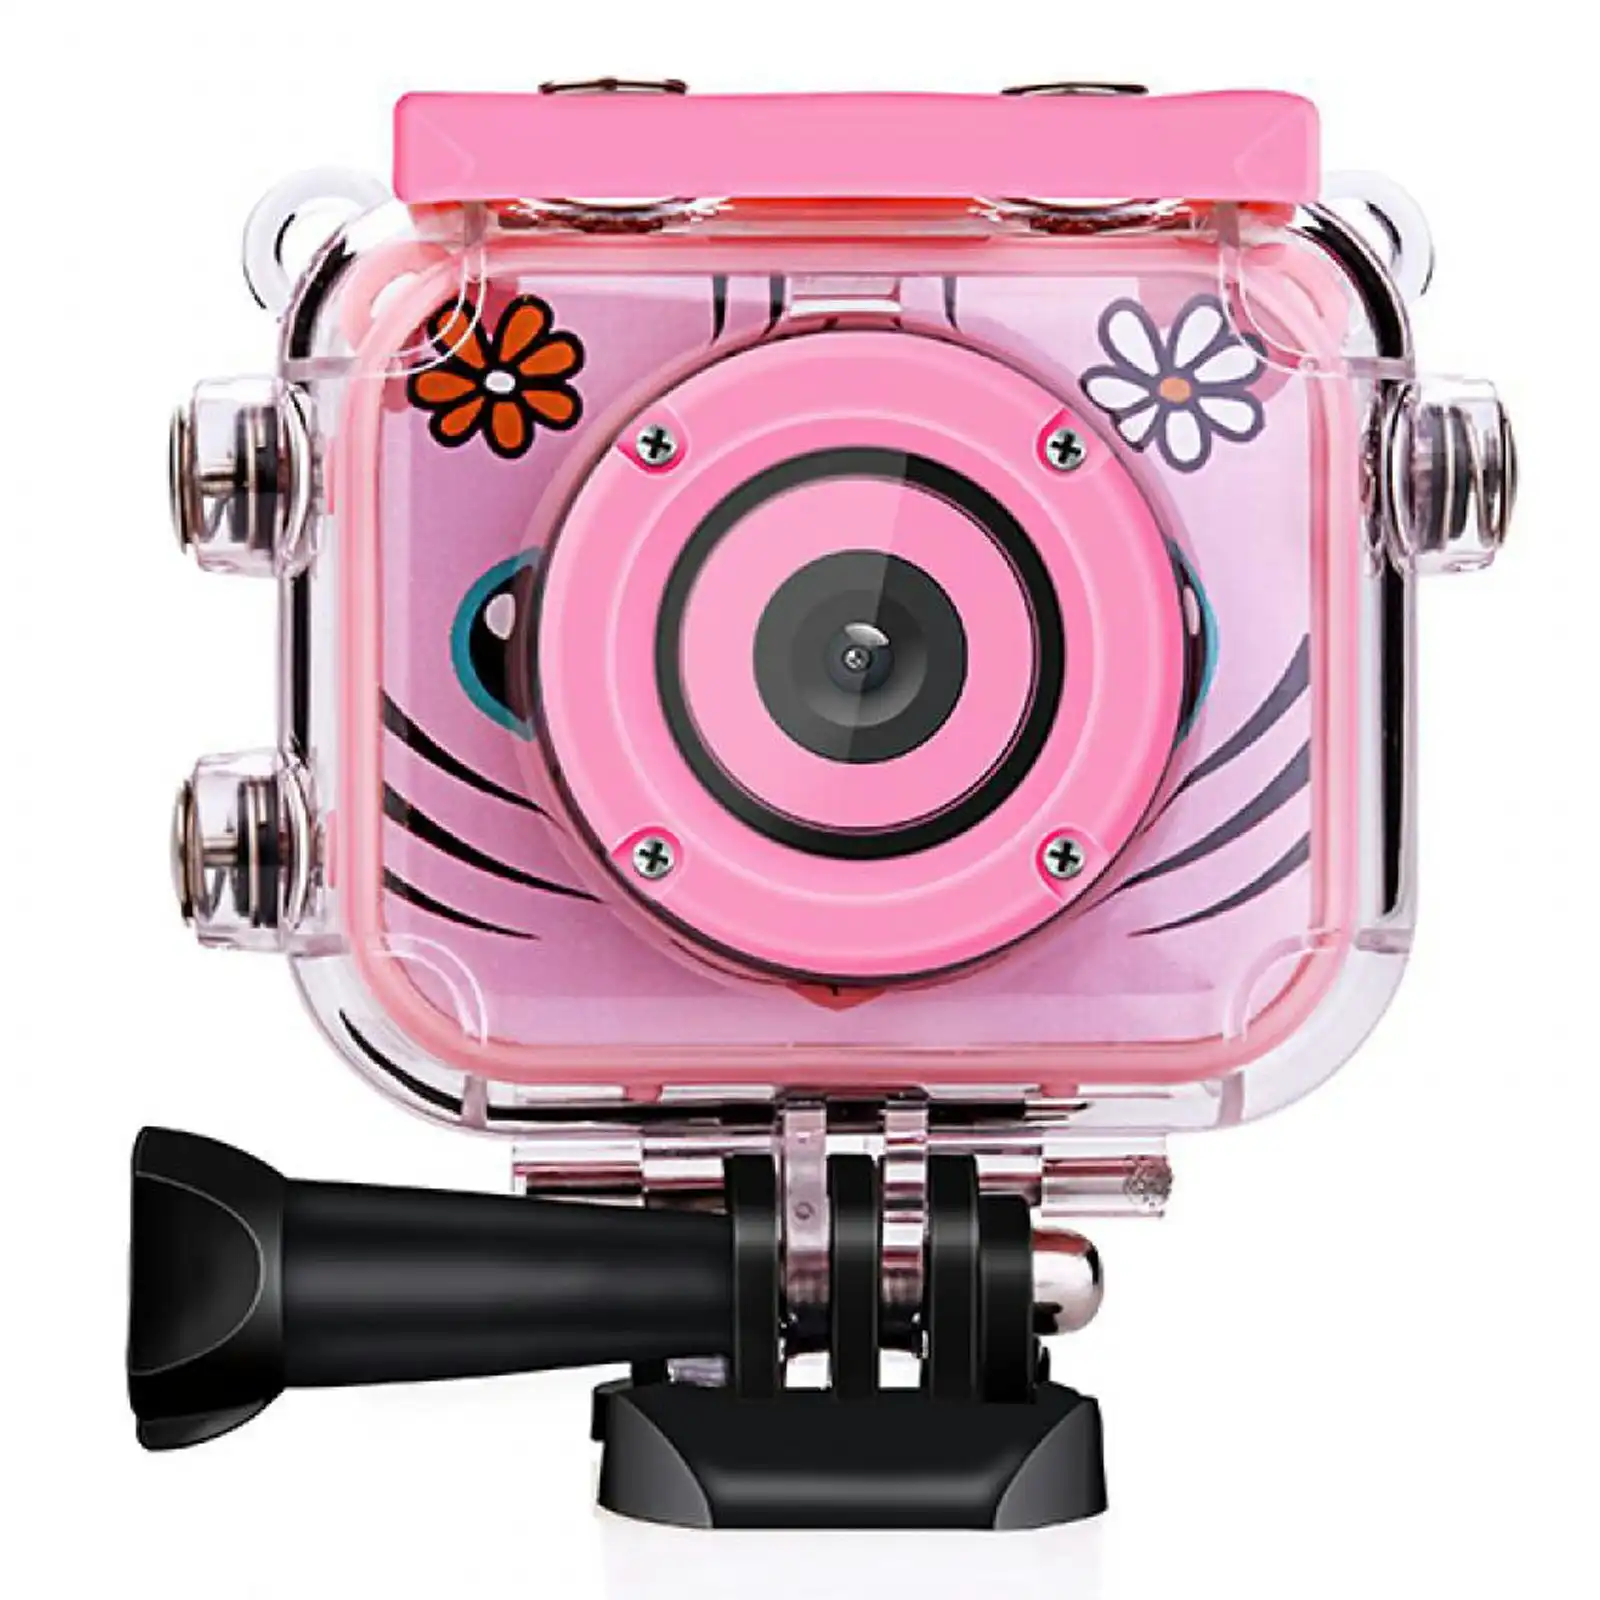 Todo 1080p FHD Kids Action Camera 30M Waterproof 2" LCD Action Cam - Pink